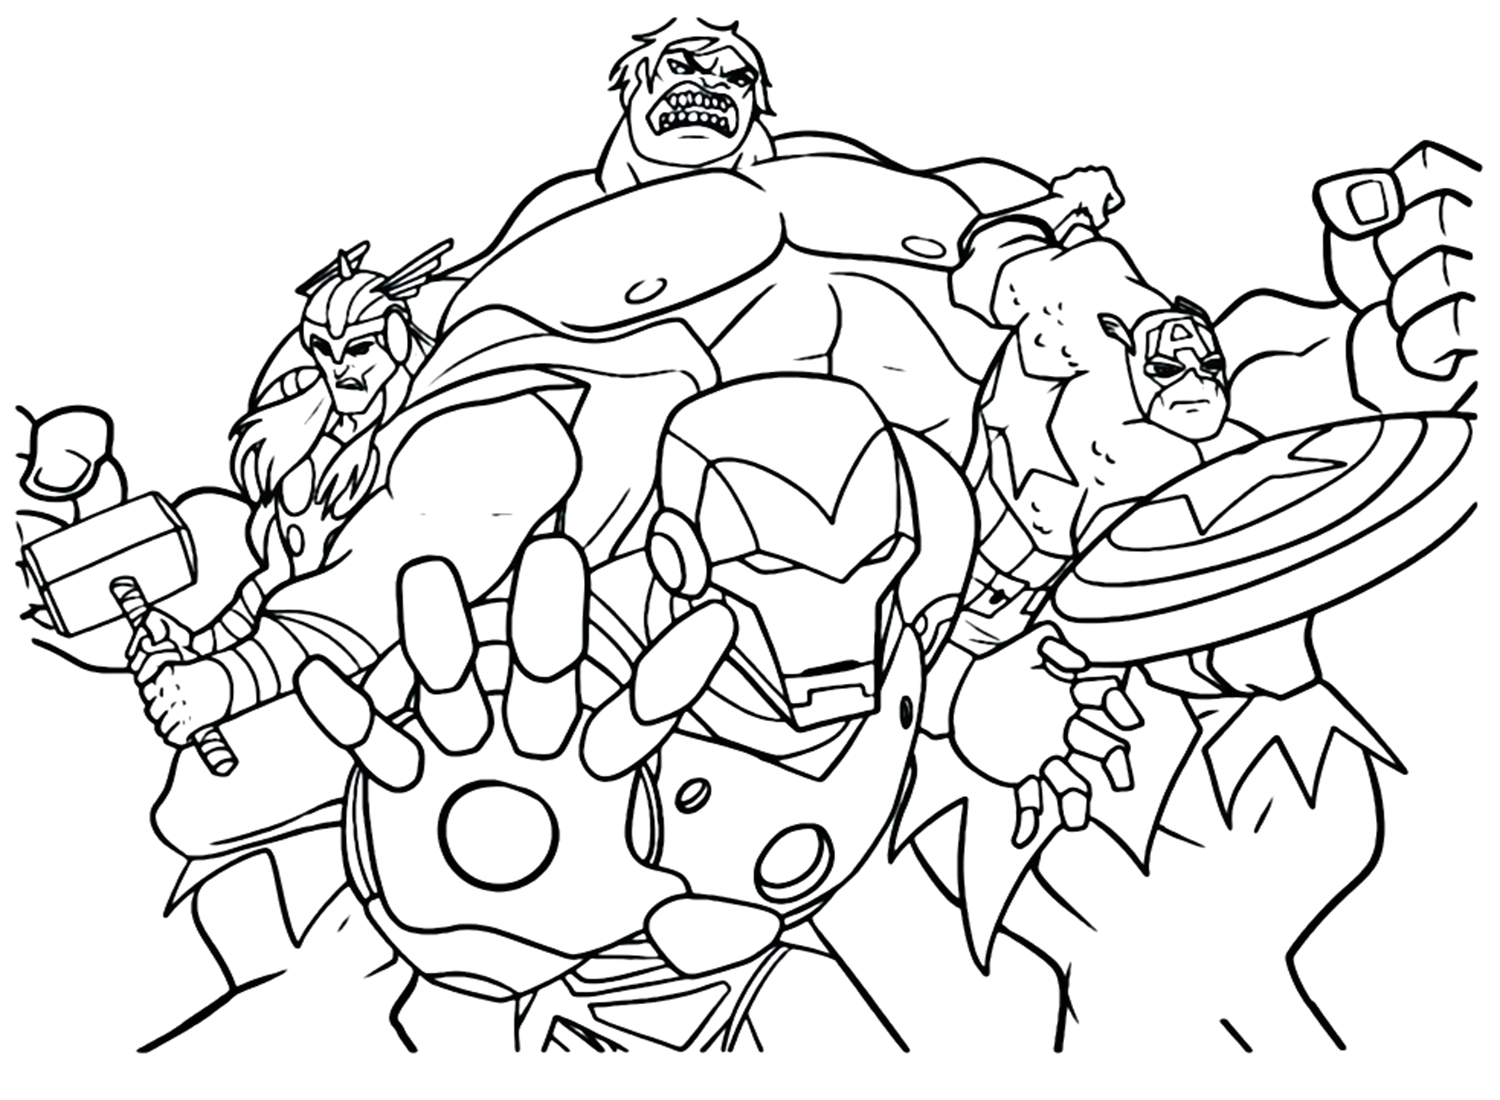 Team Iron Man And Batman 4 Coloring Pages